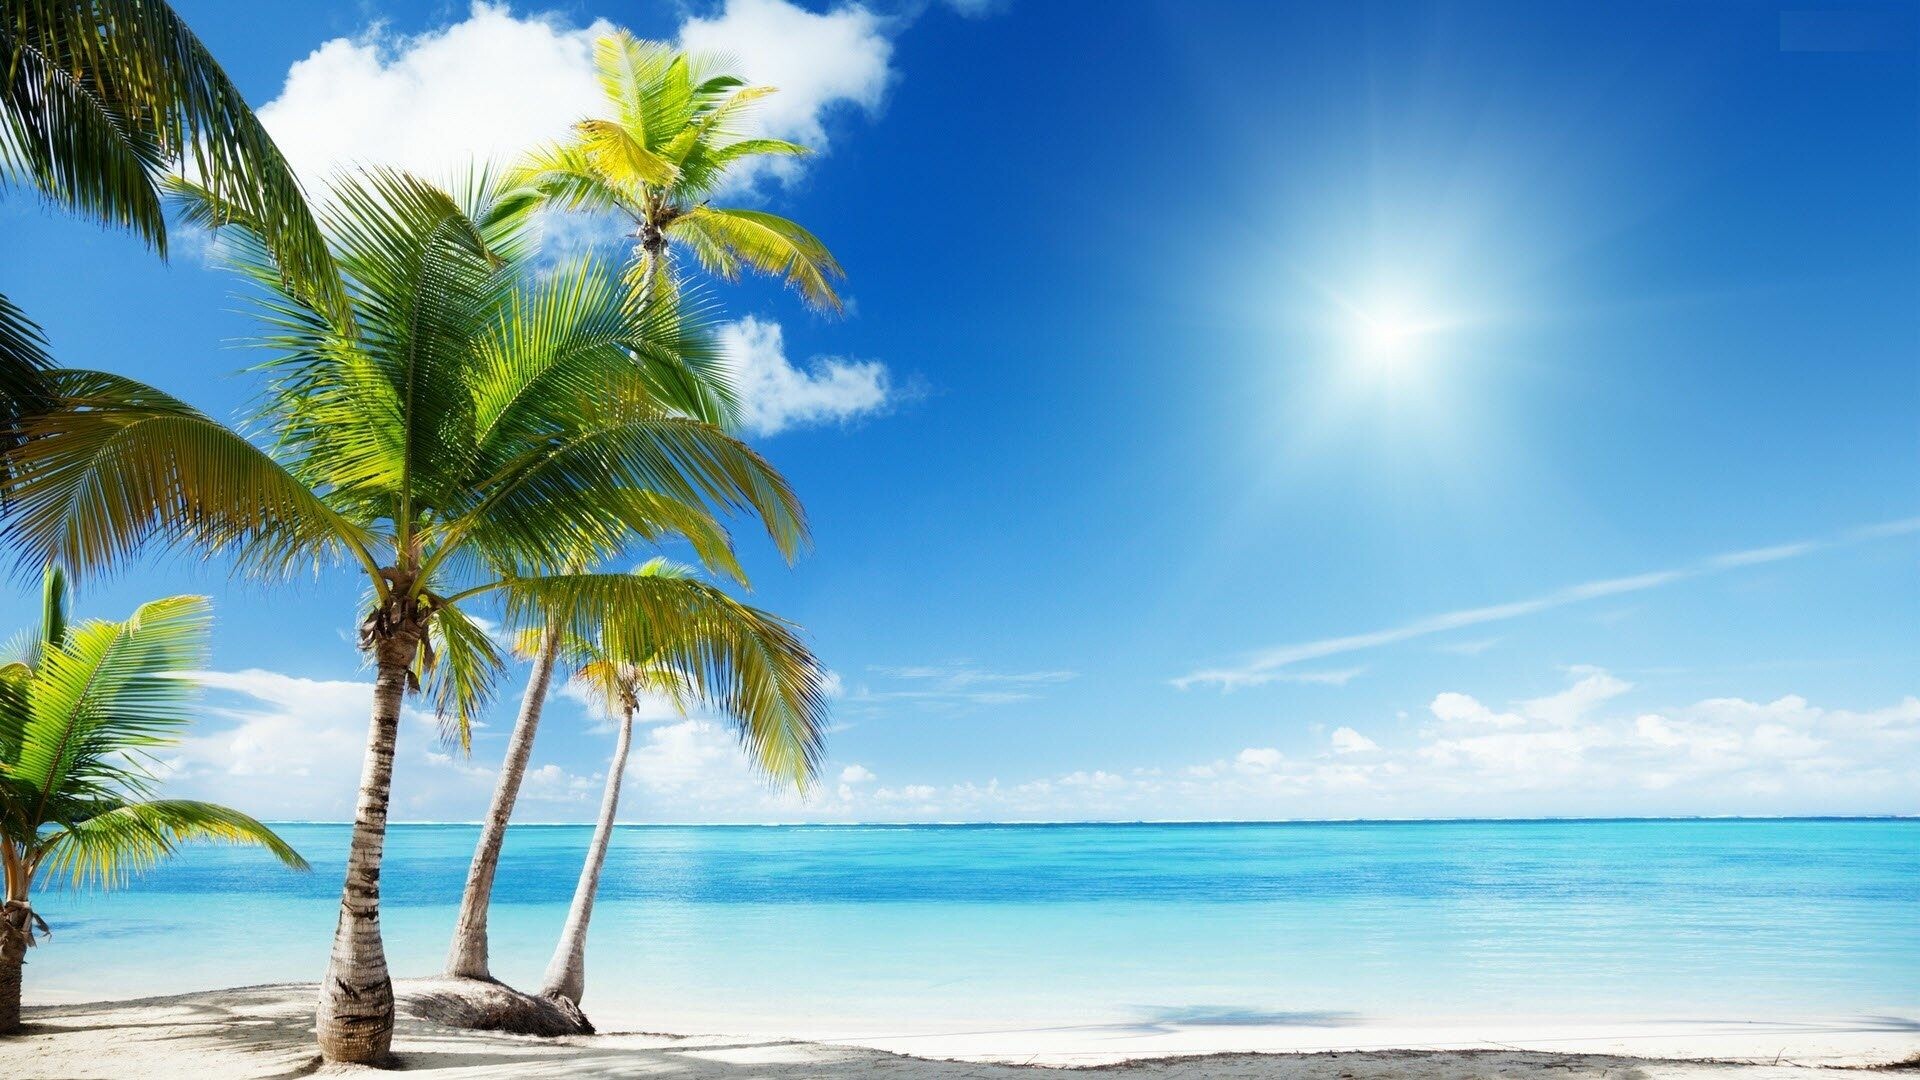 60 Tropical Beach Landscape Wallpapers HD 4K 5K for PC and Mobile   Download free images for iPhone Android